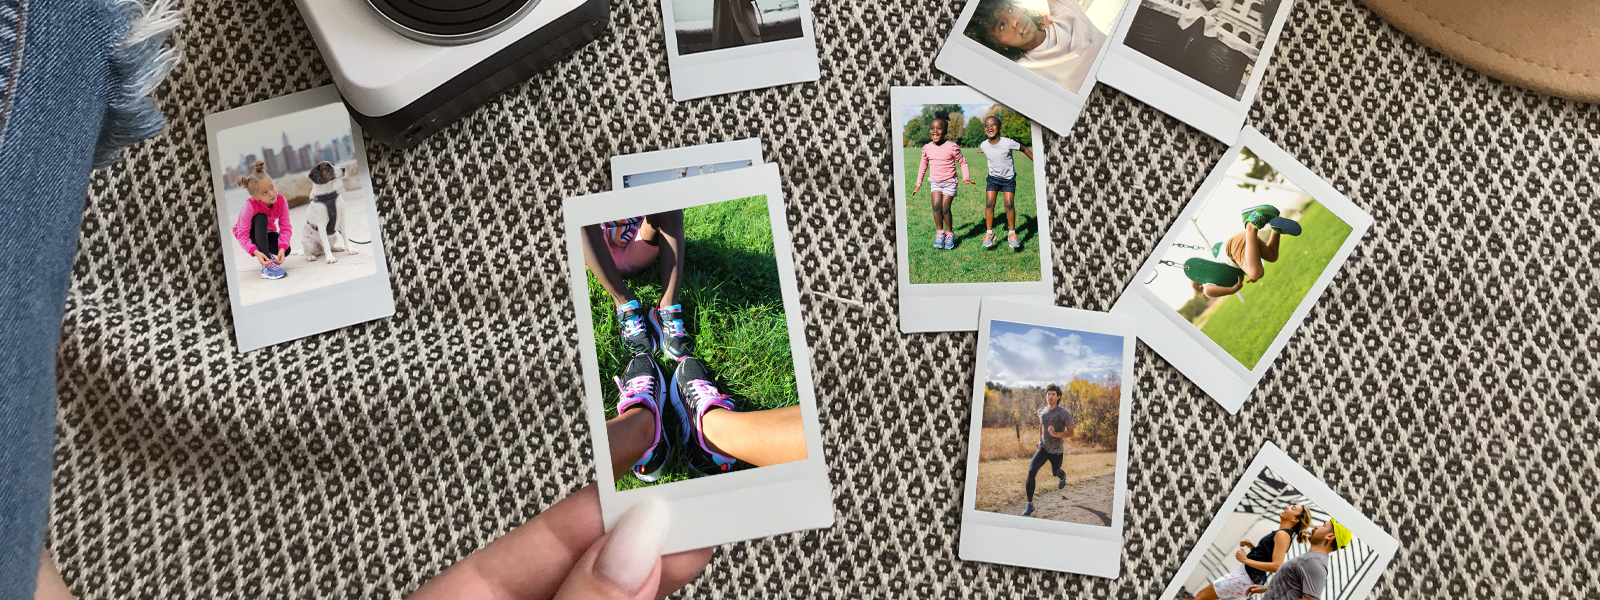 A collection of Polaroids showing family at play and excercising.